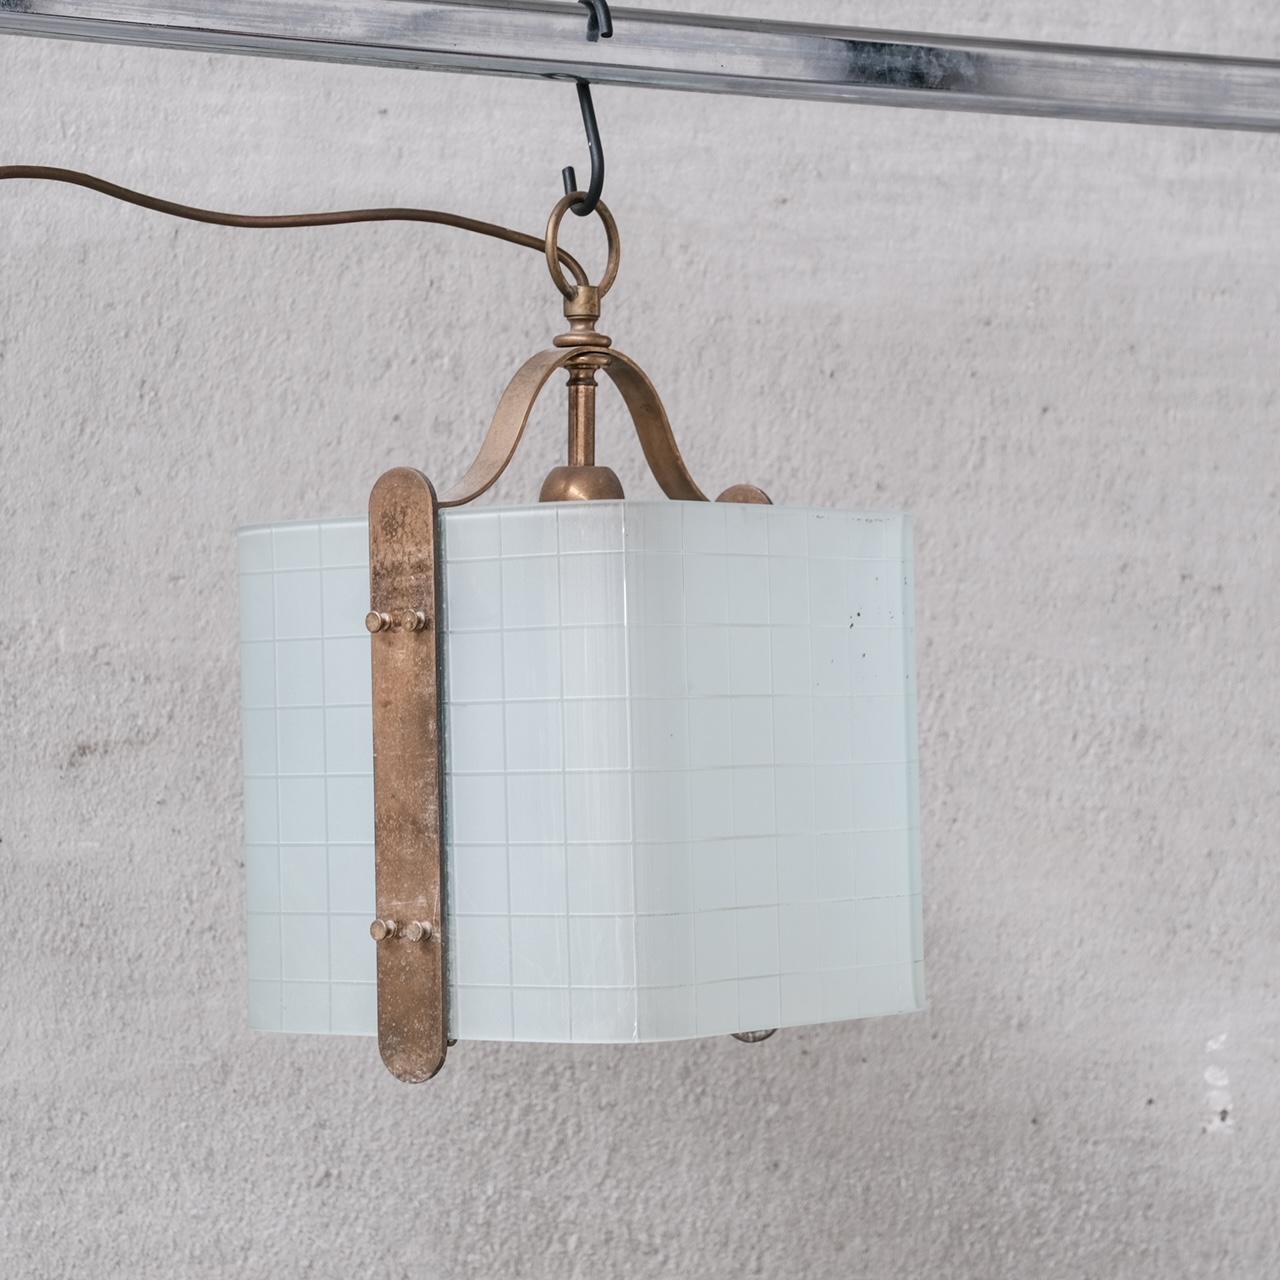 An unusual square glass pendant light, curved sides, with brass construction.

Italy, c1970s.

Opaque glass.

Good vintage condition.

Location: Belgium Gallery.

Dimensions: 25 W x 27 D x 43 Height in cm.

Delivery: POA

We can ship around the